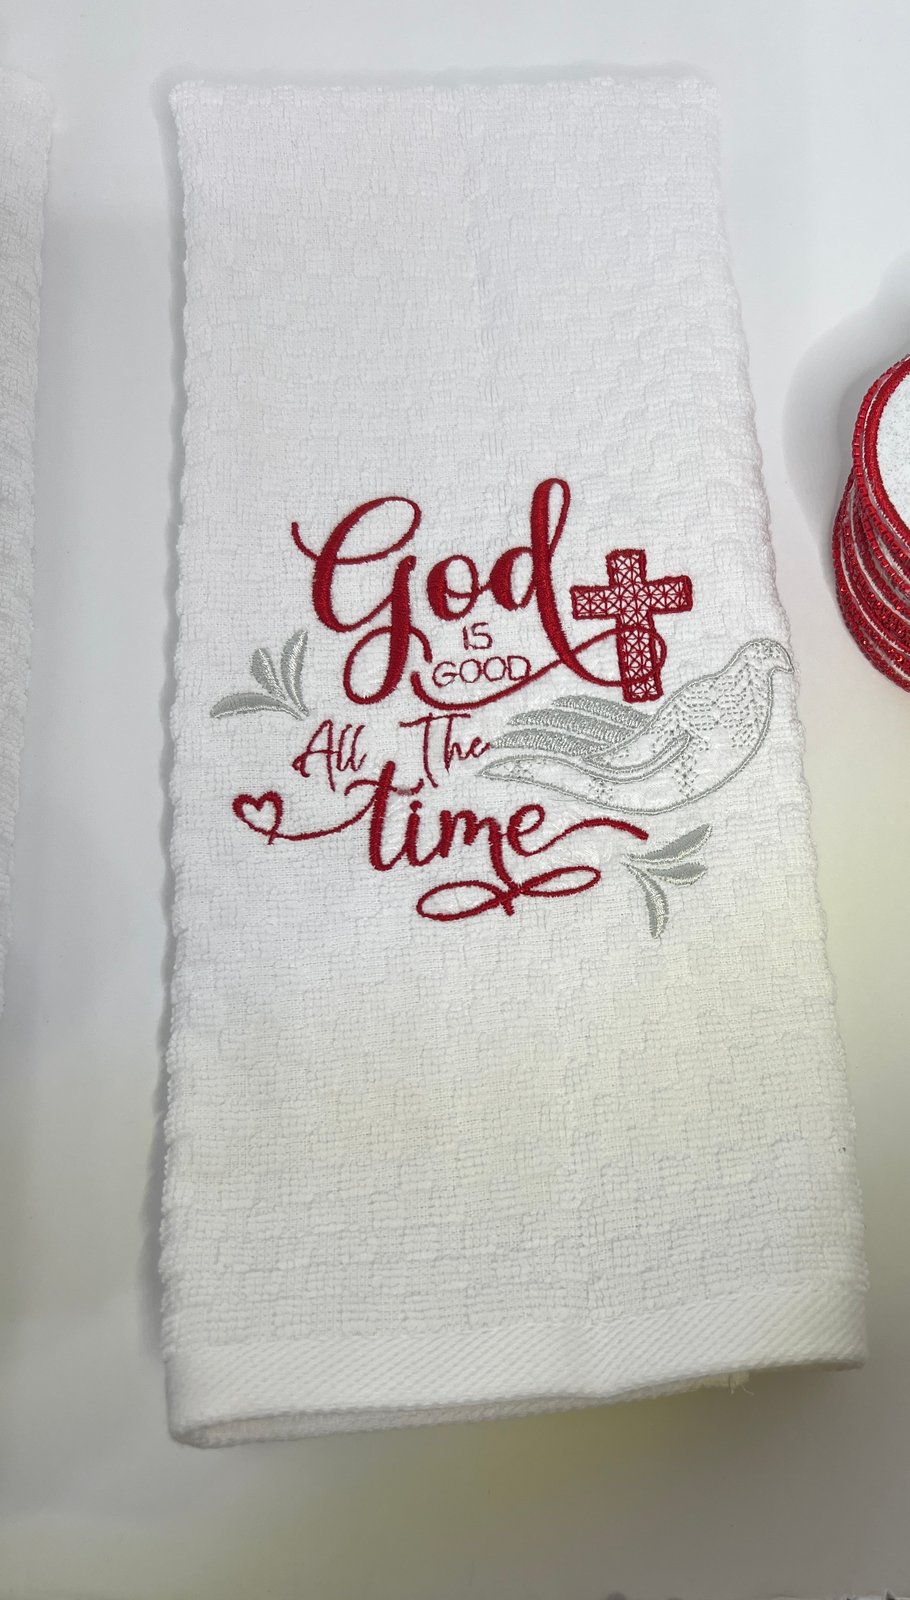 Embroidered Kitchen Towel Blessed Are Those Who Do My Dishes 